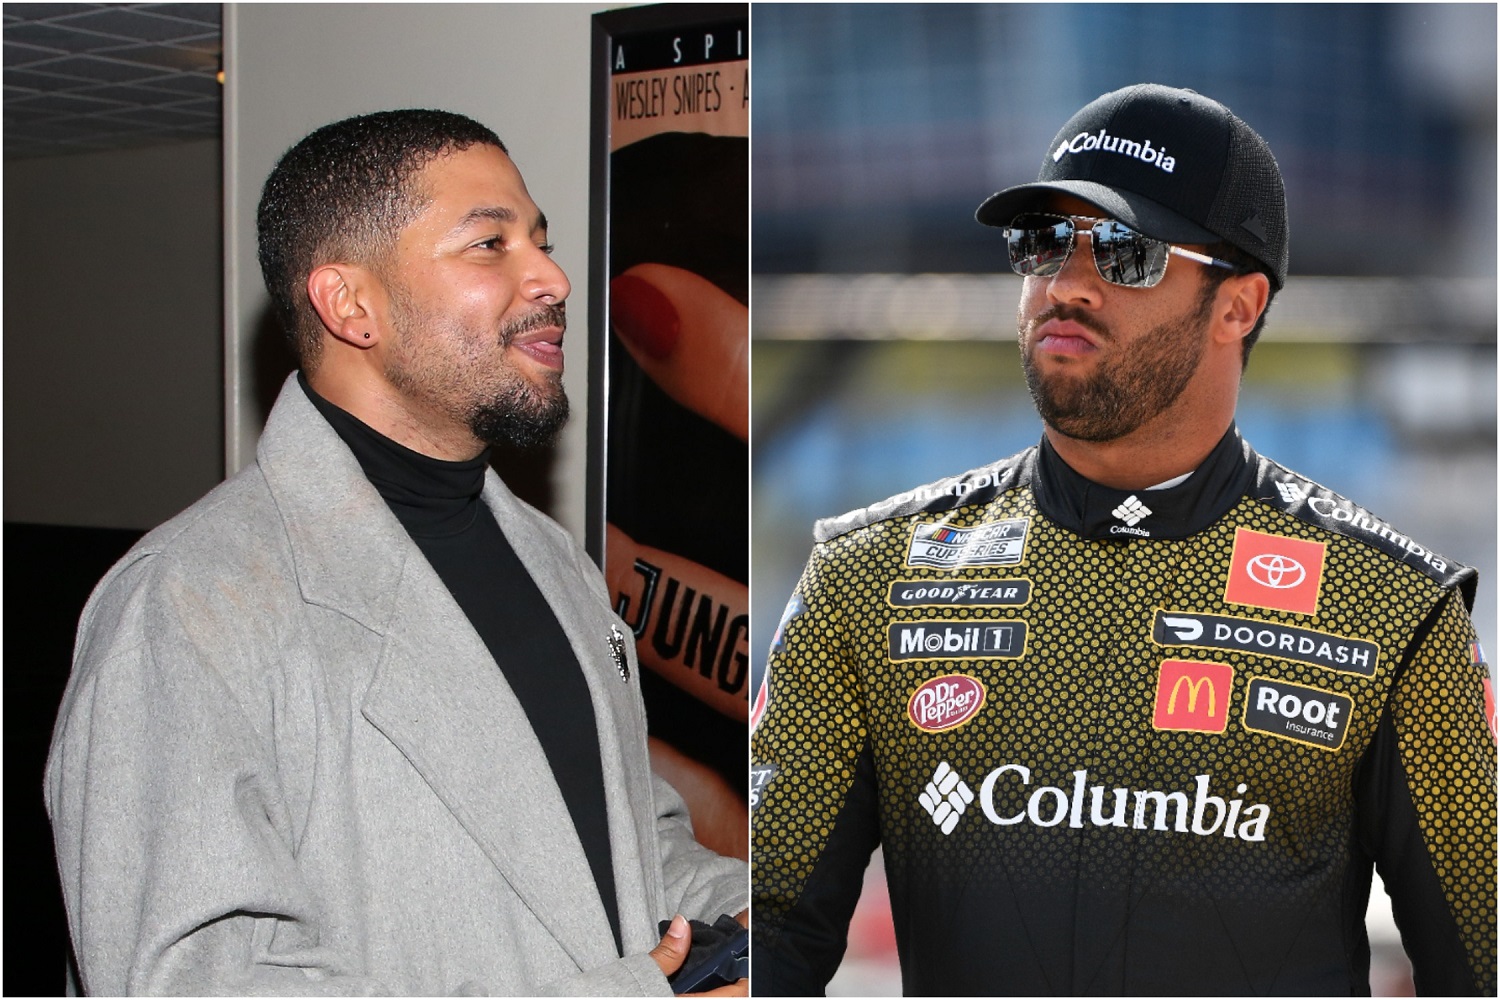 A jury convicted actor Jussie Smollett, left, on five charges Thursday, leading some on Twitter to inaccurately draw parallels to a 2020 incident involving NASCAR driver Bubba Wallace,, right.